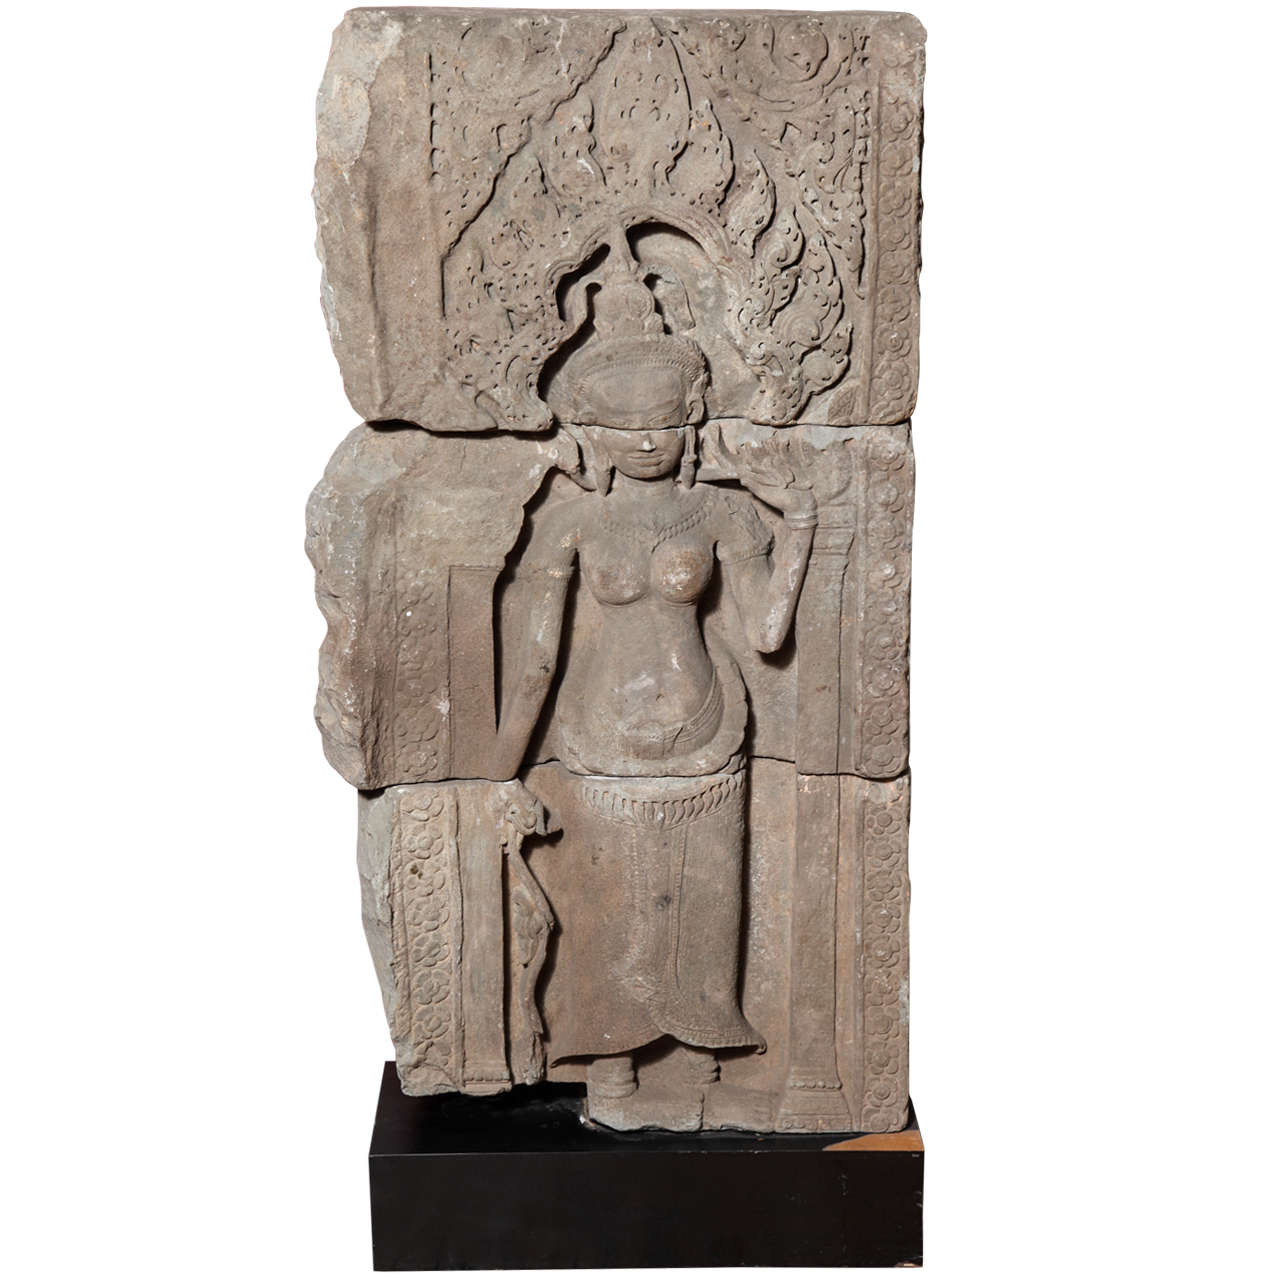 12th or 13th Century Cambodian Khmer Apsara Dancer Architectural Temple Carving